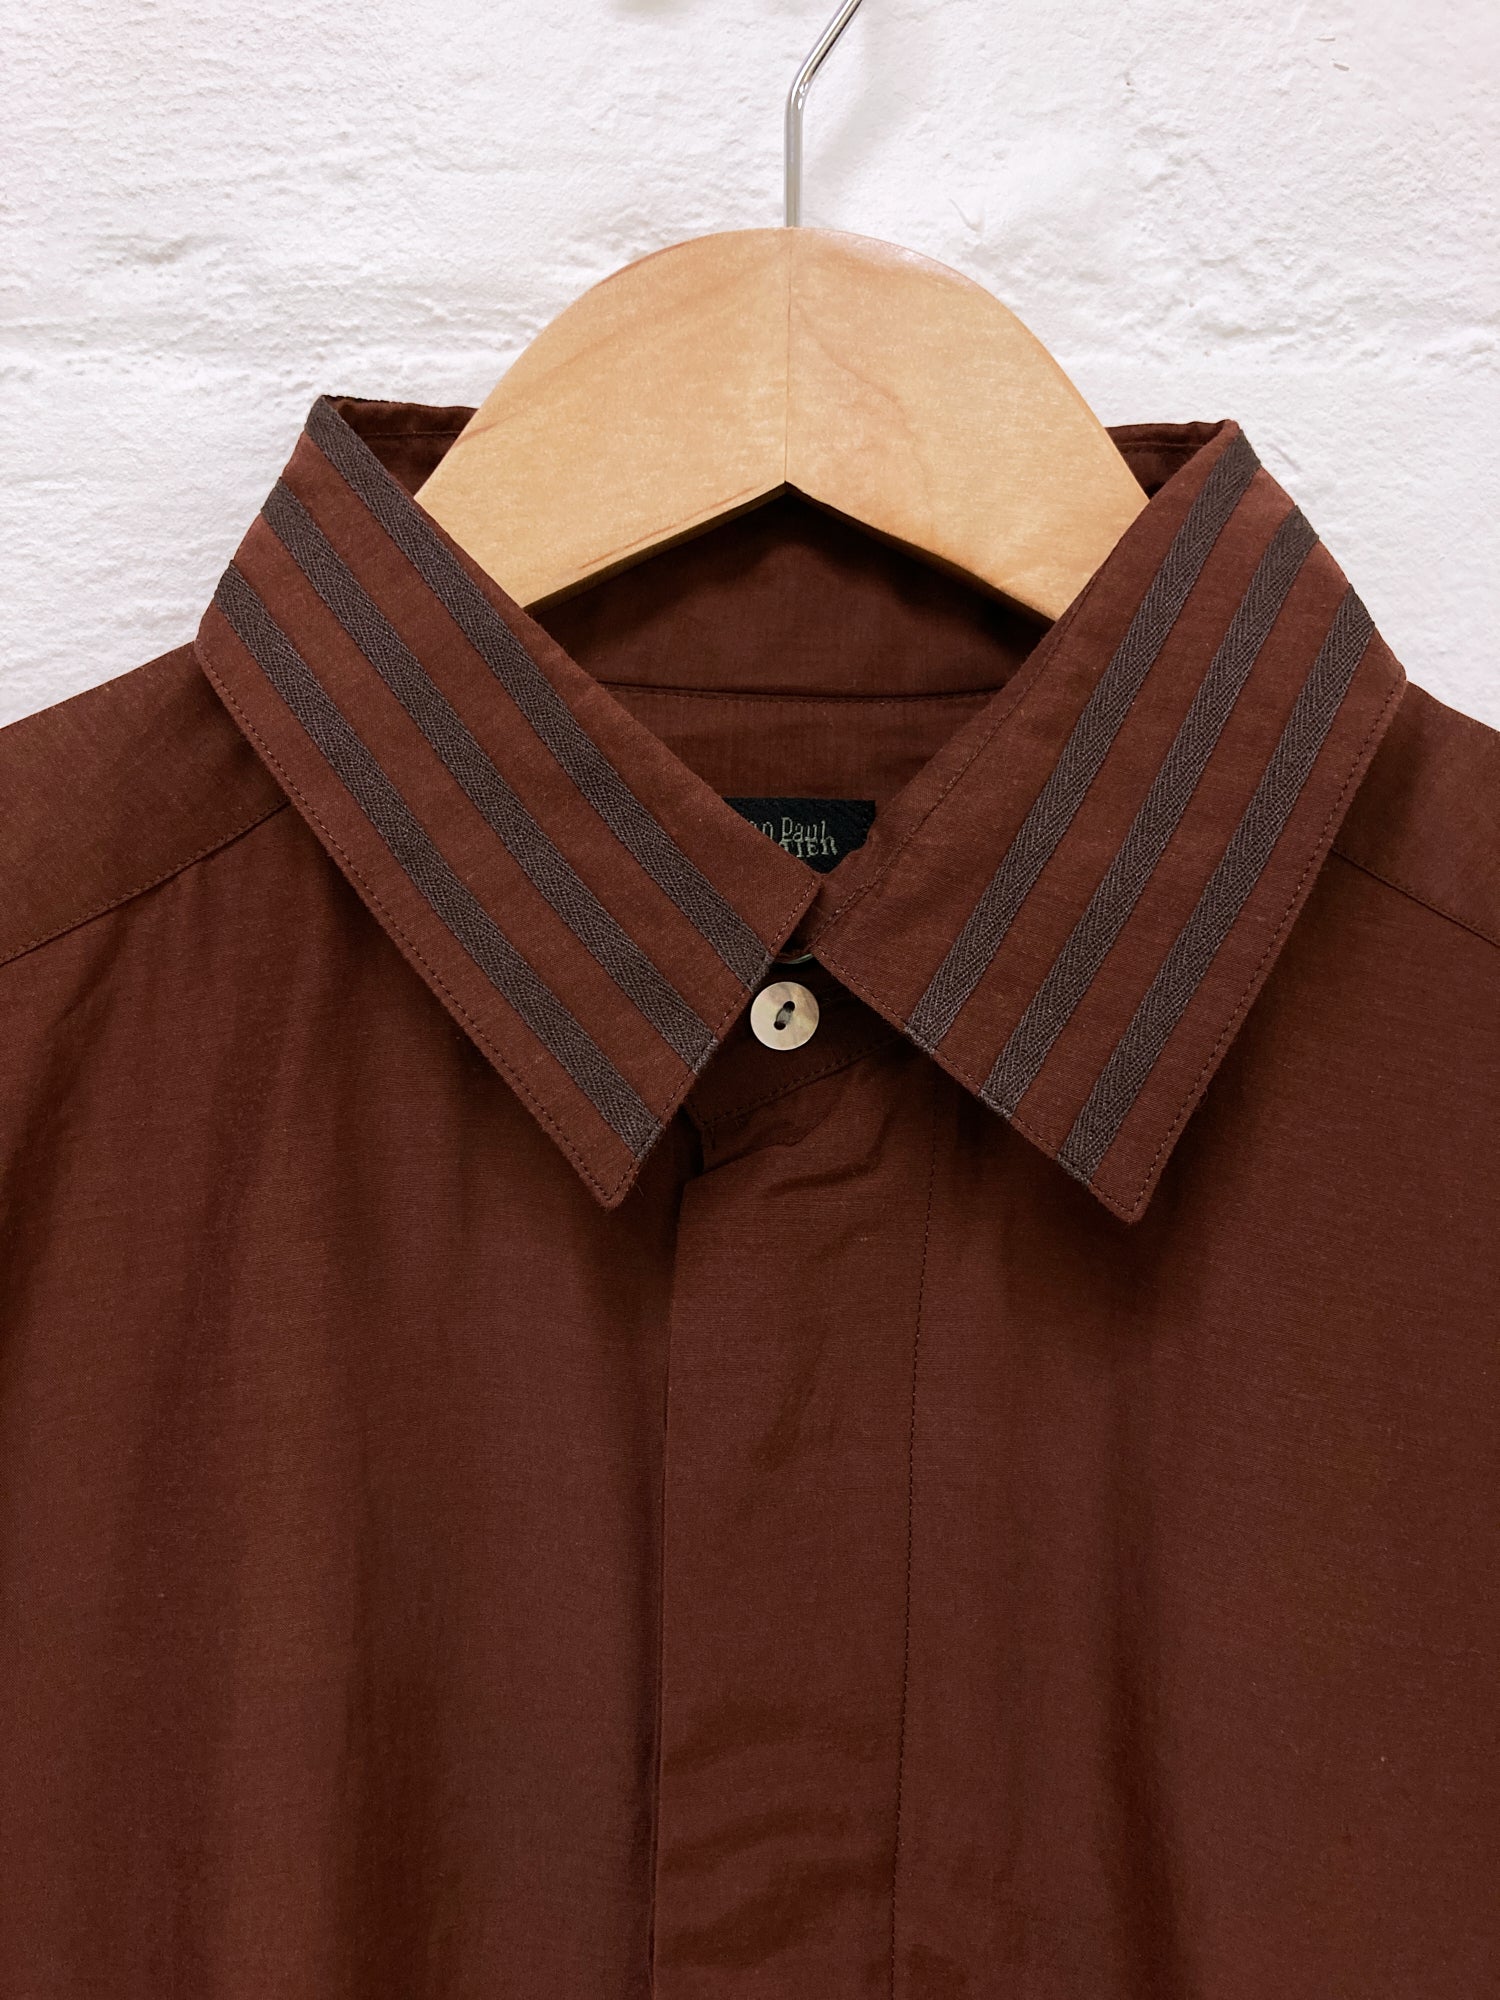 Jean Paul Gaultier Homme 1990s sheeny brown tape detail shirt - size 48